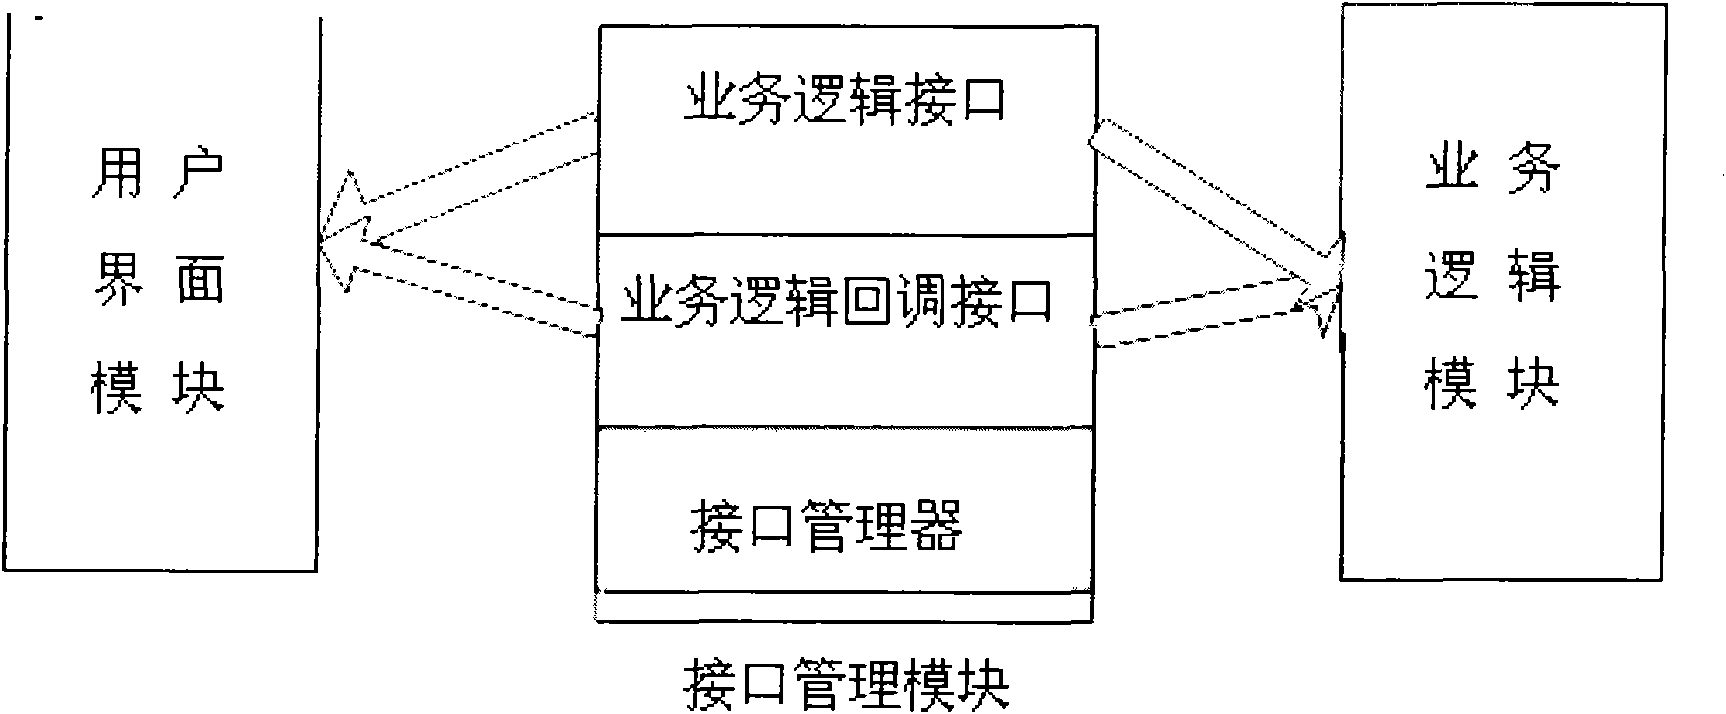 Device for separating user interface form service logic